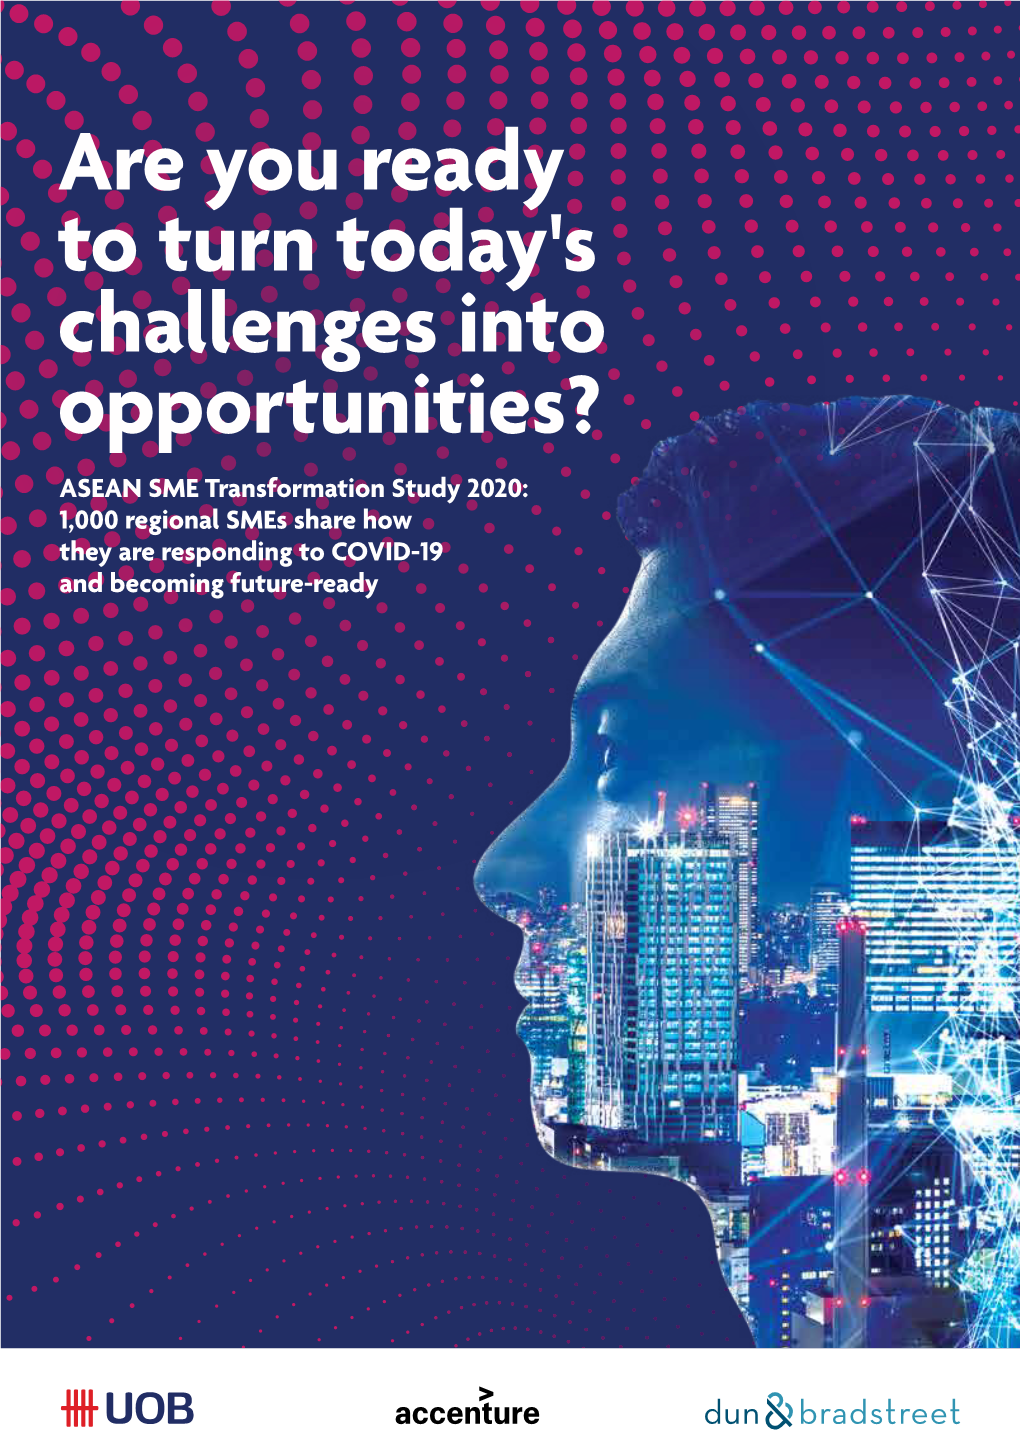 ASEAN SME TRANSFORMATION SURVEY 2020 Positioning Looking Ahead: Their Businesses Opportunities for the Future for ASEAN Post-COVID-19 Page 22 Page 32